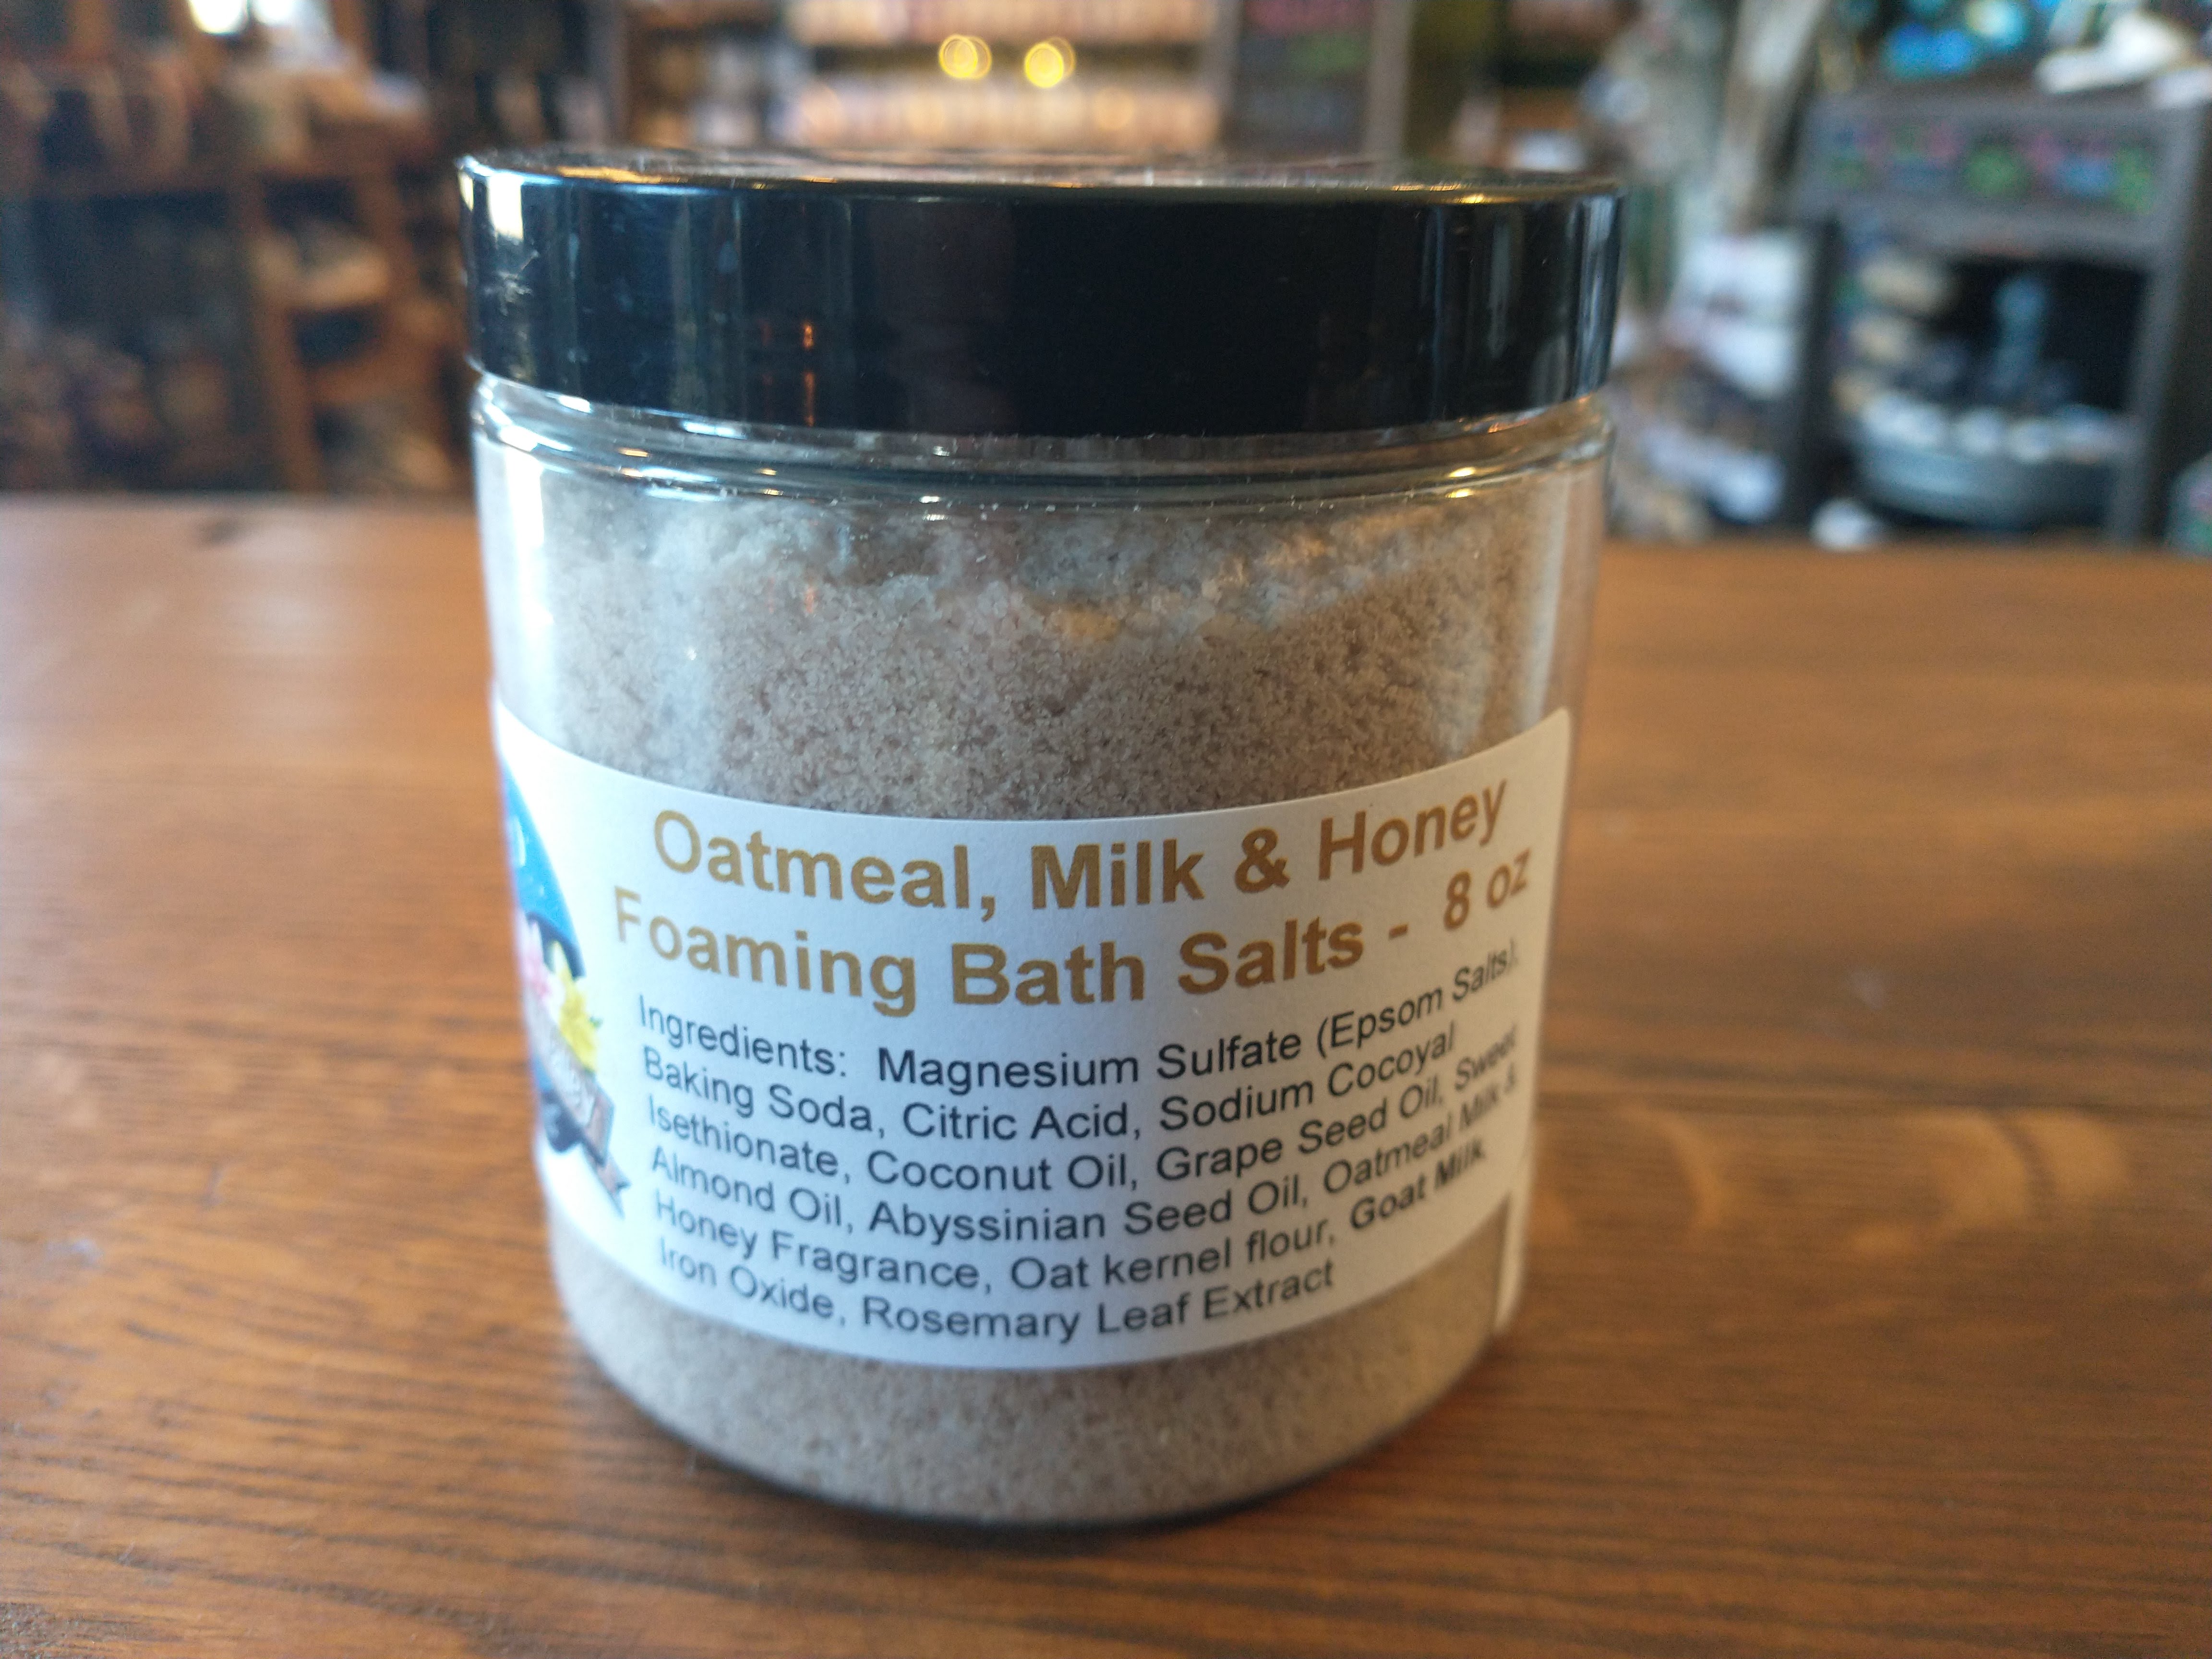 Oatmeal Milk & Honey Foaming Bath Salts (with Goat's Milk) - Click Image to Close